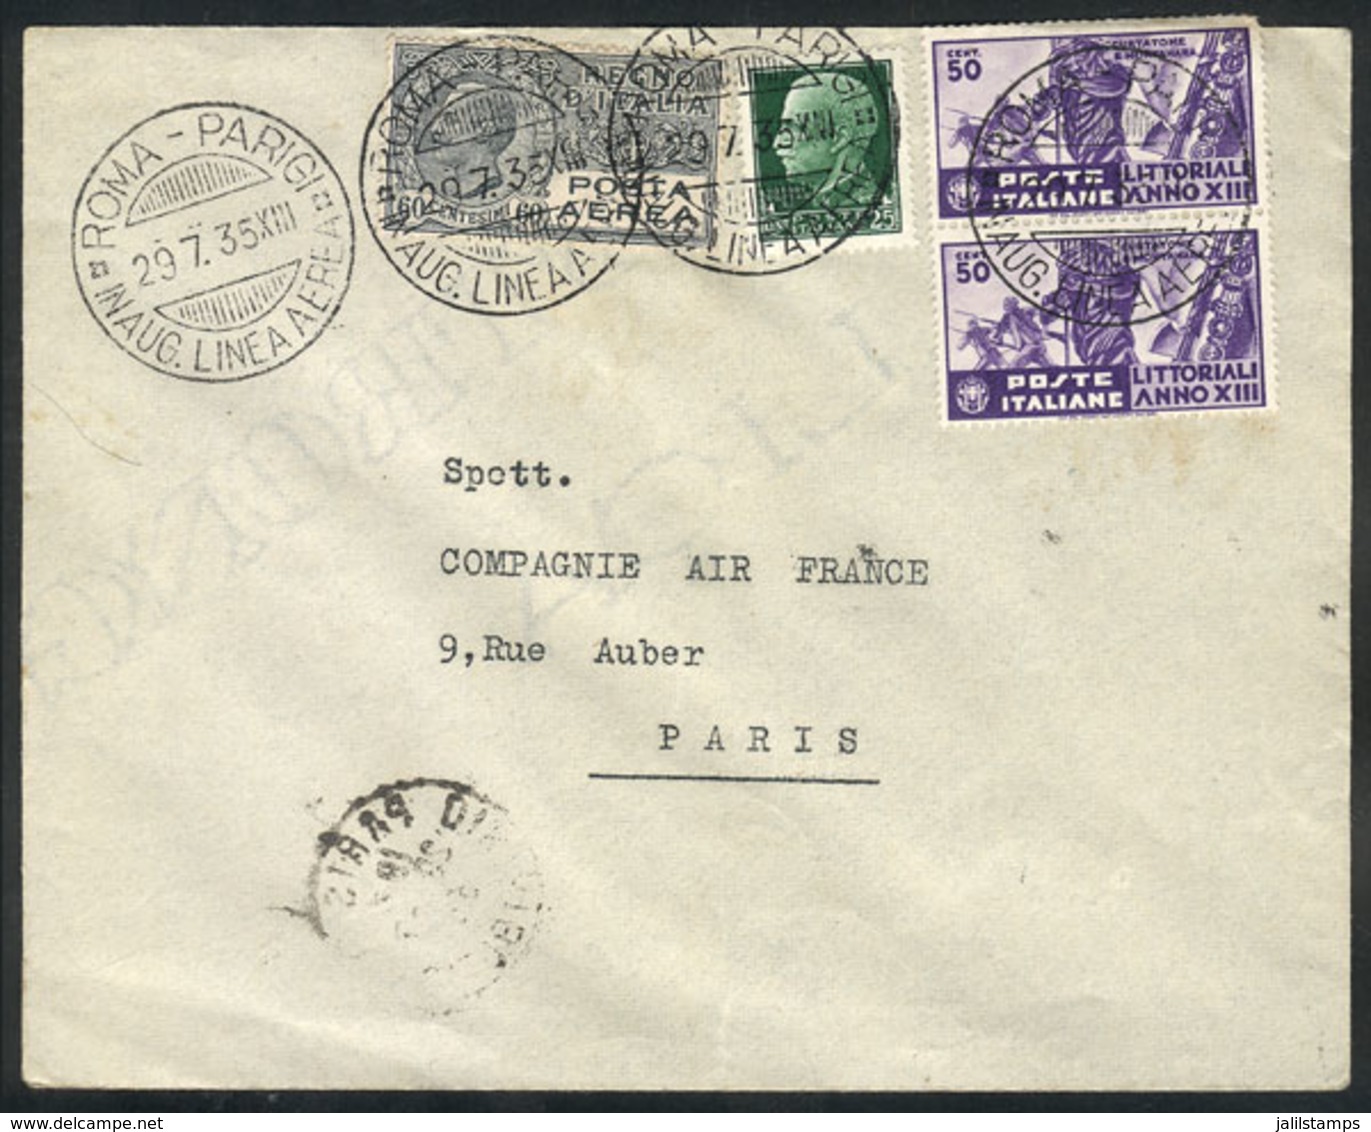 725 ITALY: 29/JUL/1935 Roma - Paris: First Flight By Air France, Cover Of Very Fine Quality! - Non Classés